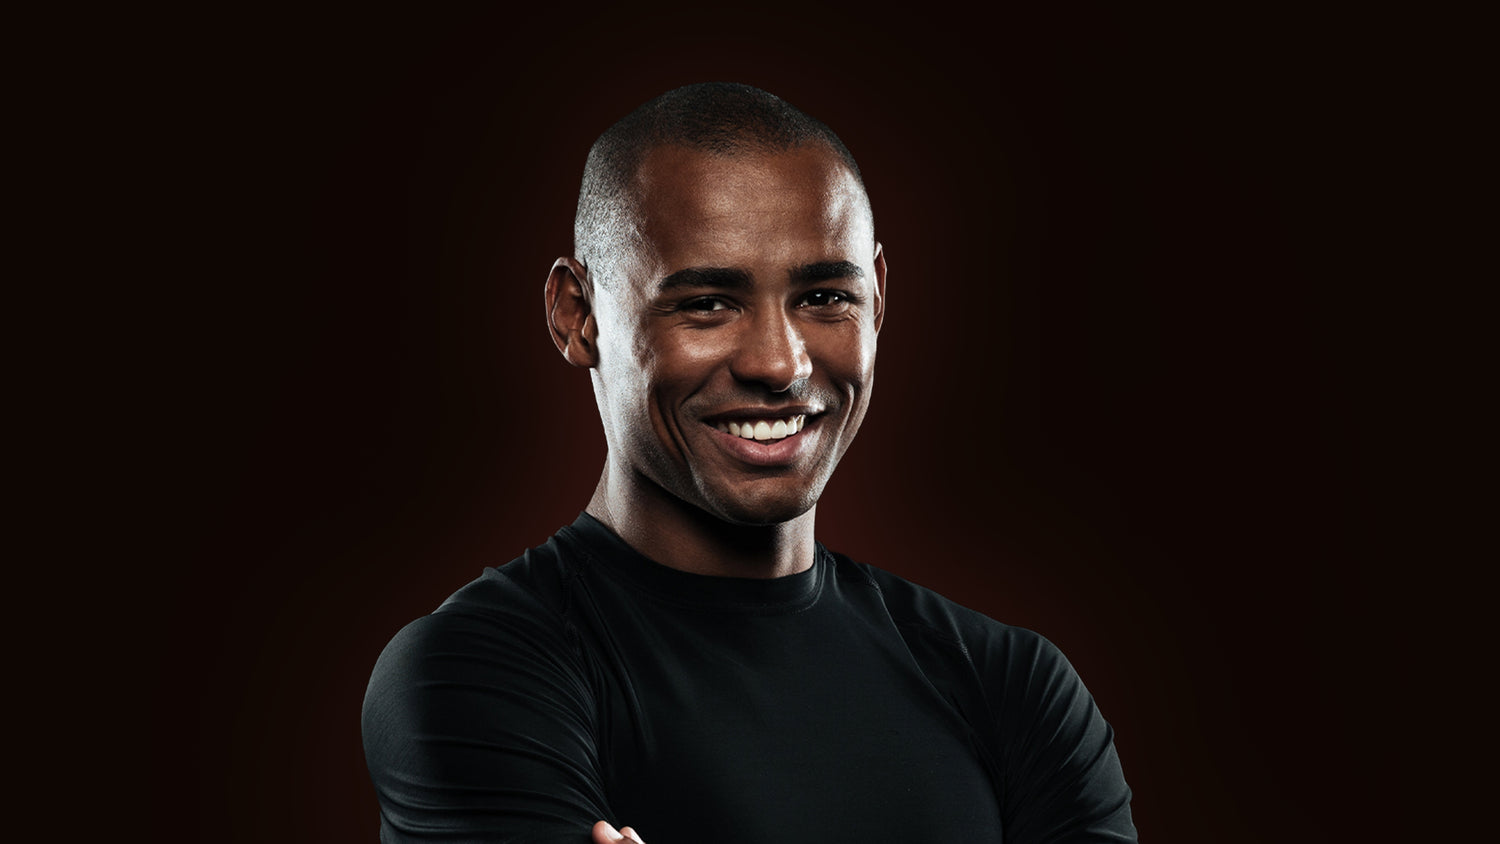 A Black background image of a Happy Confident Man.